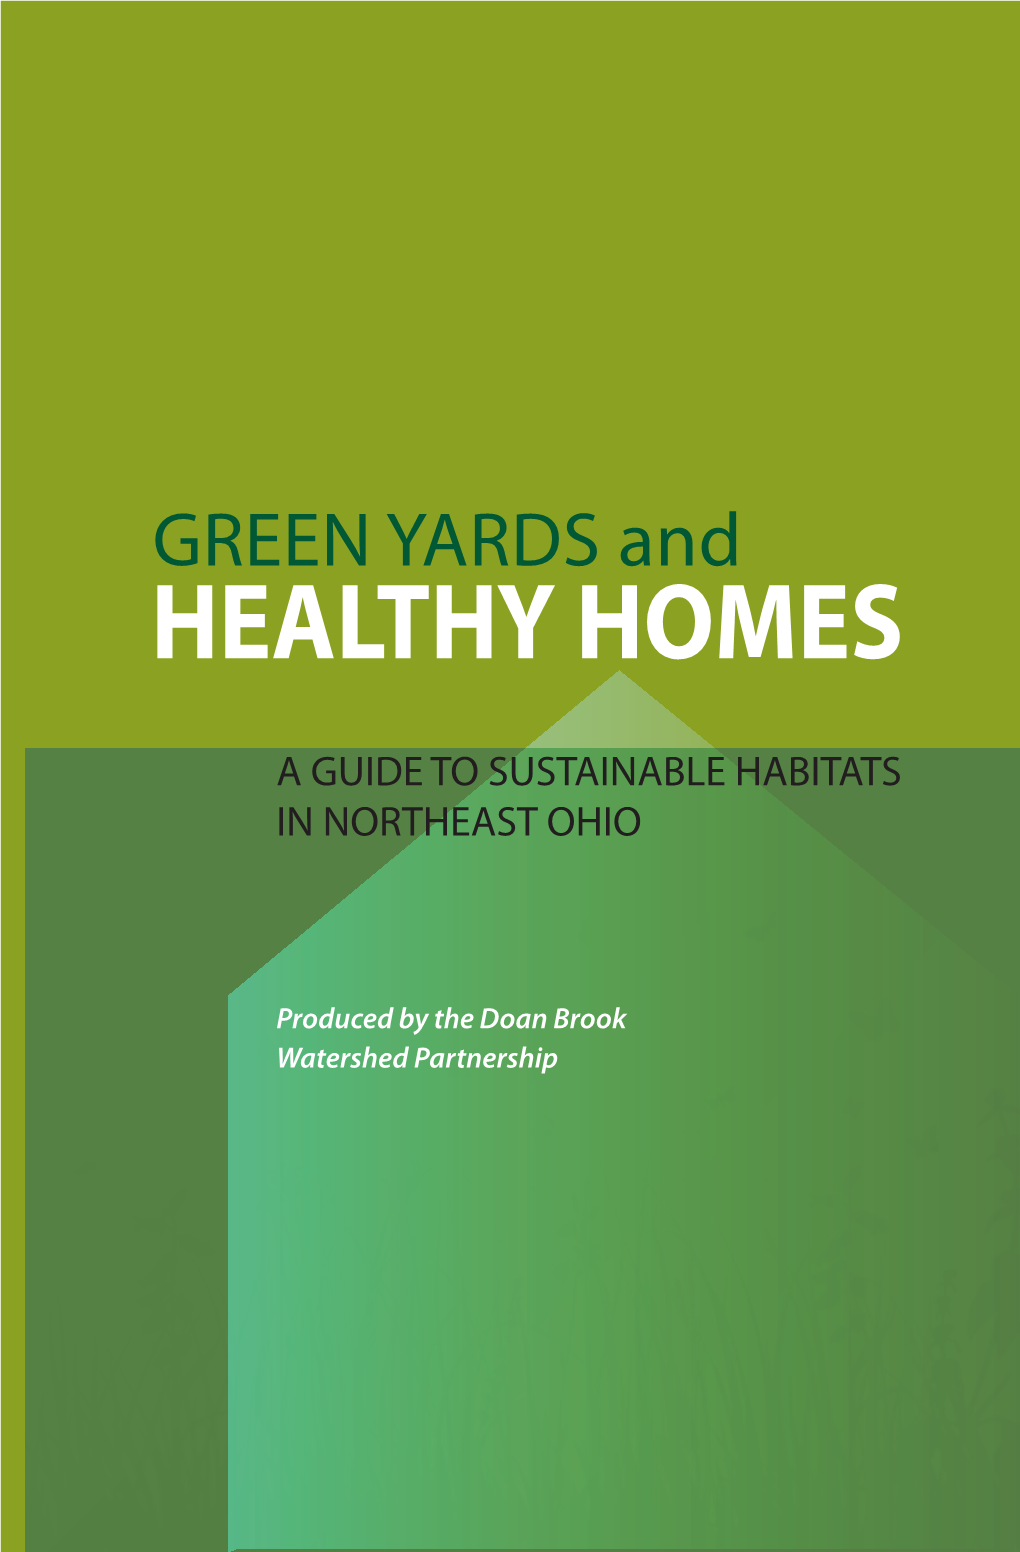 GREEN YARDS and HEALTHY HOMES